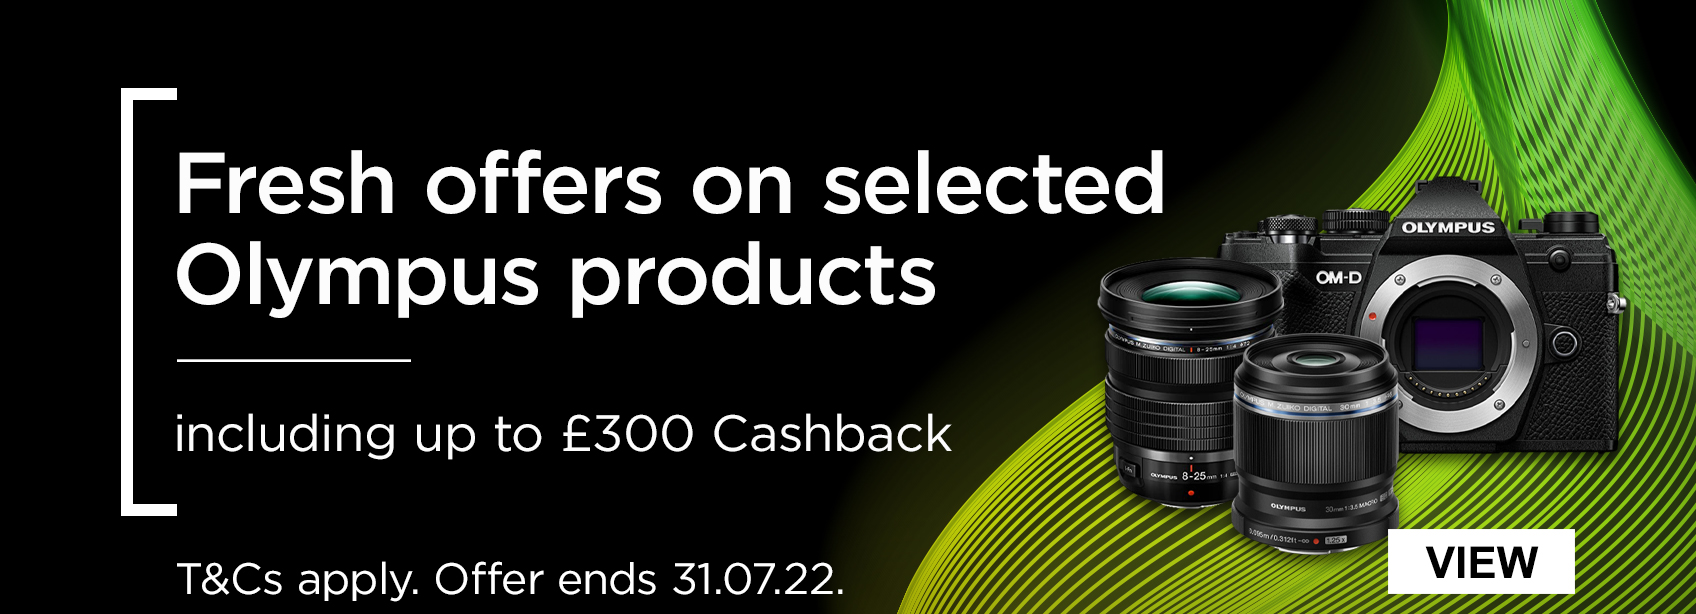 Fresh offers on selected Olympus products - including up to £300 cashback (T&Cs apply. Offer ends 31.07.22)